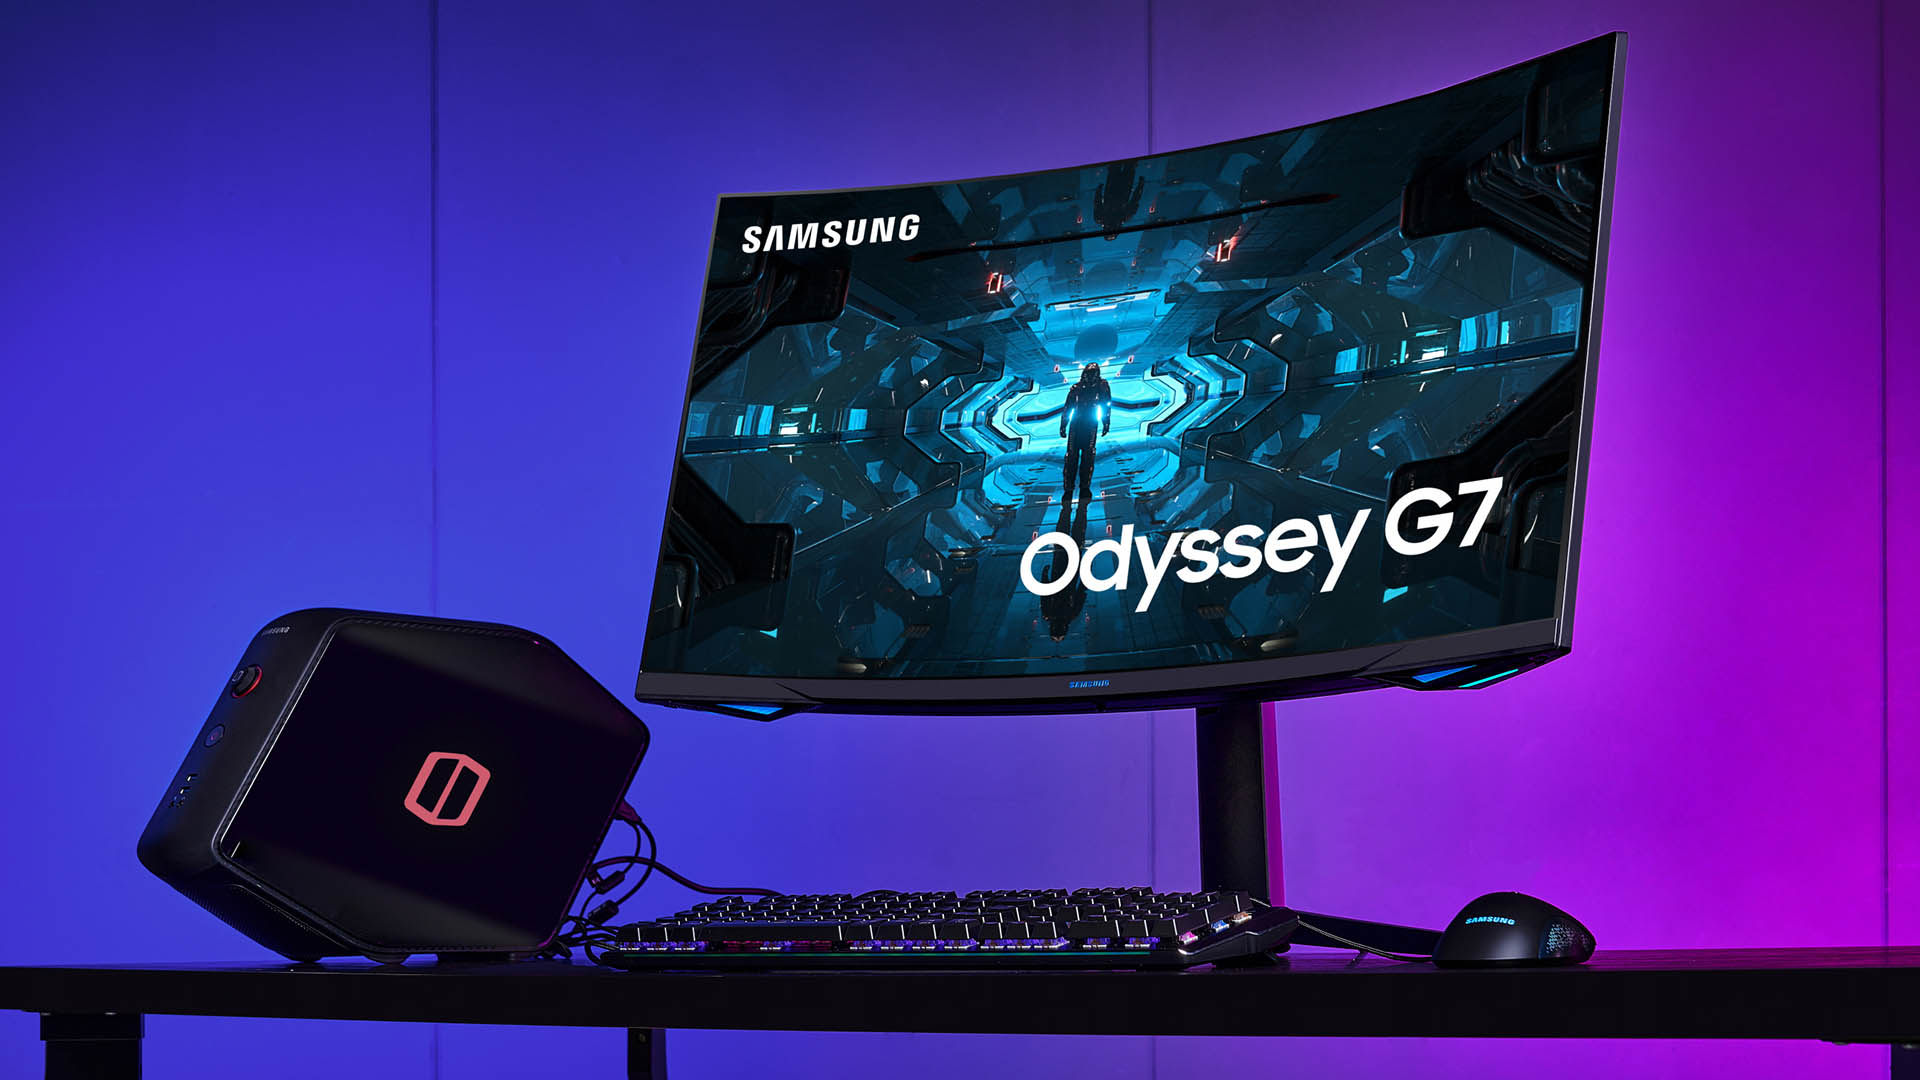 Samsung's super-curvy 240Hz G7 gaming monitor will launch this month